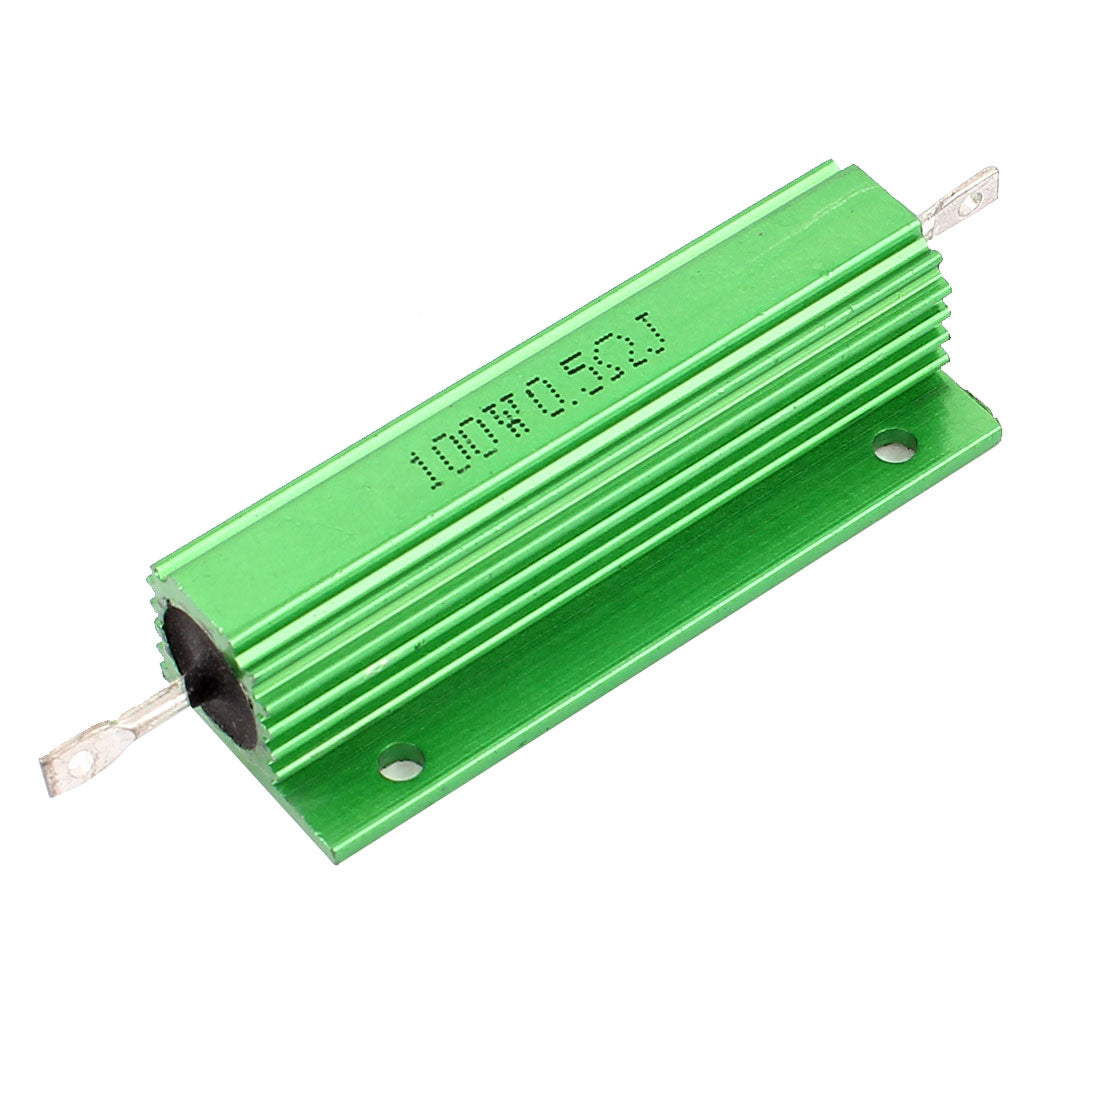 uxcell Uxcell Aluminum Shell 100W Watt 0.5 Ohm Chassis Mounted Wirewound Resistor